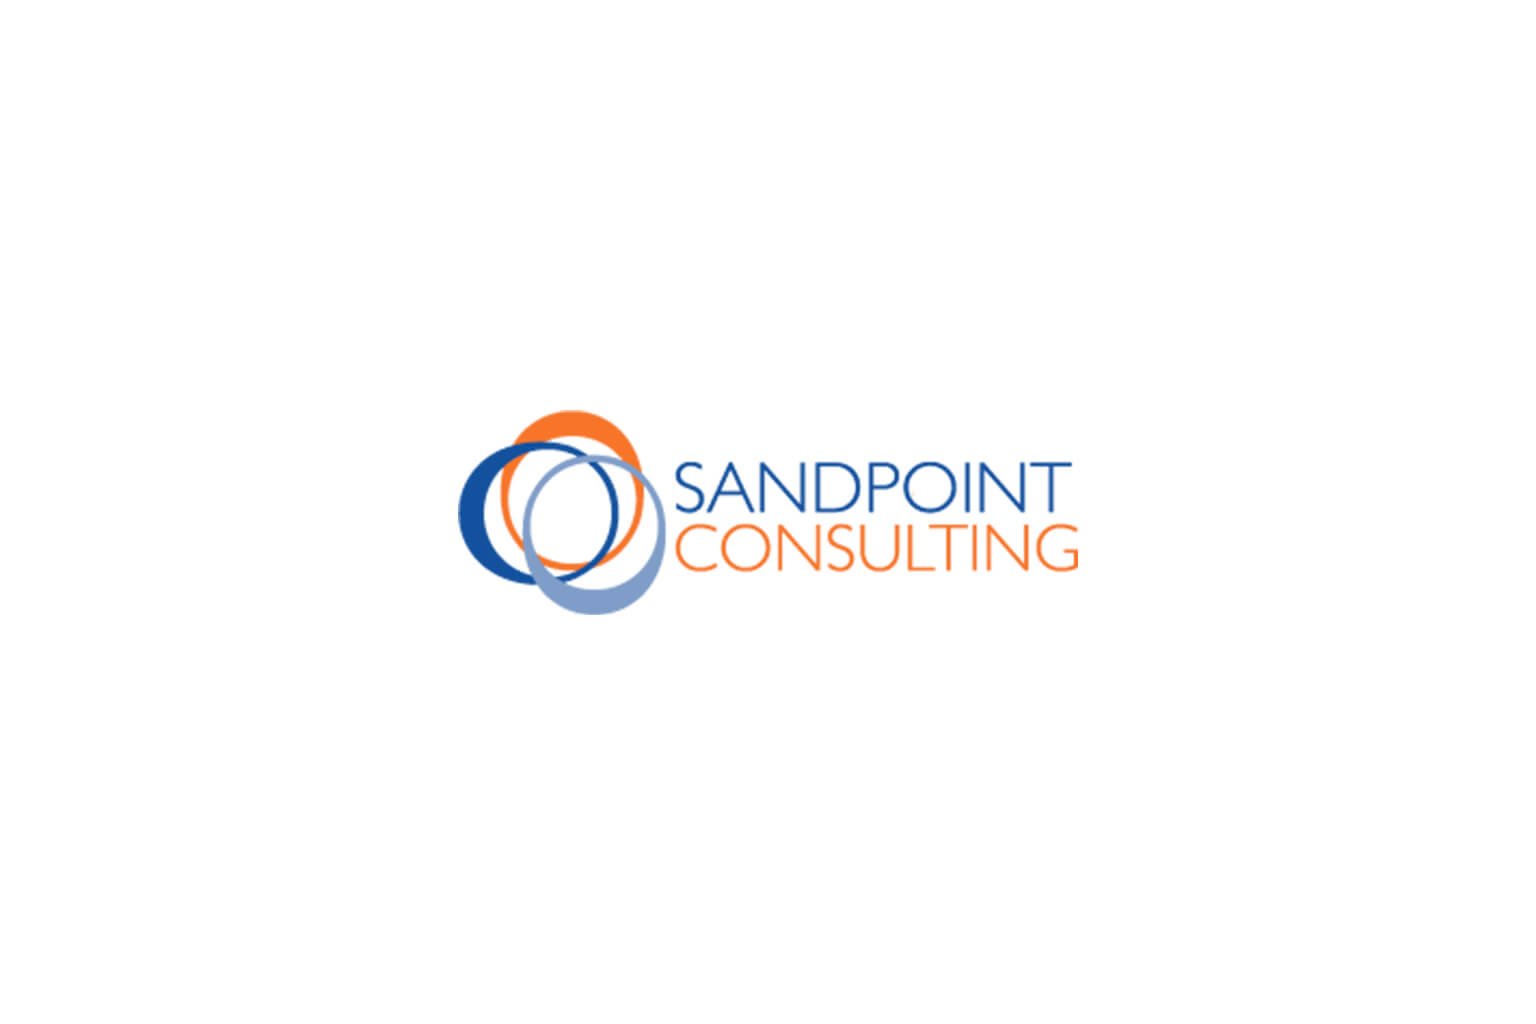 SandPoint Consulting